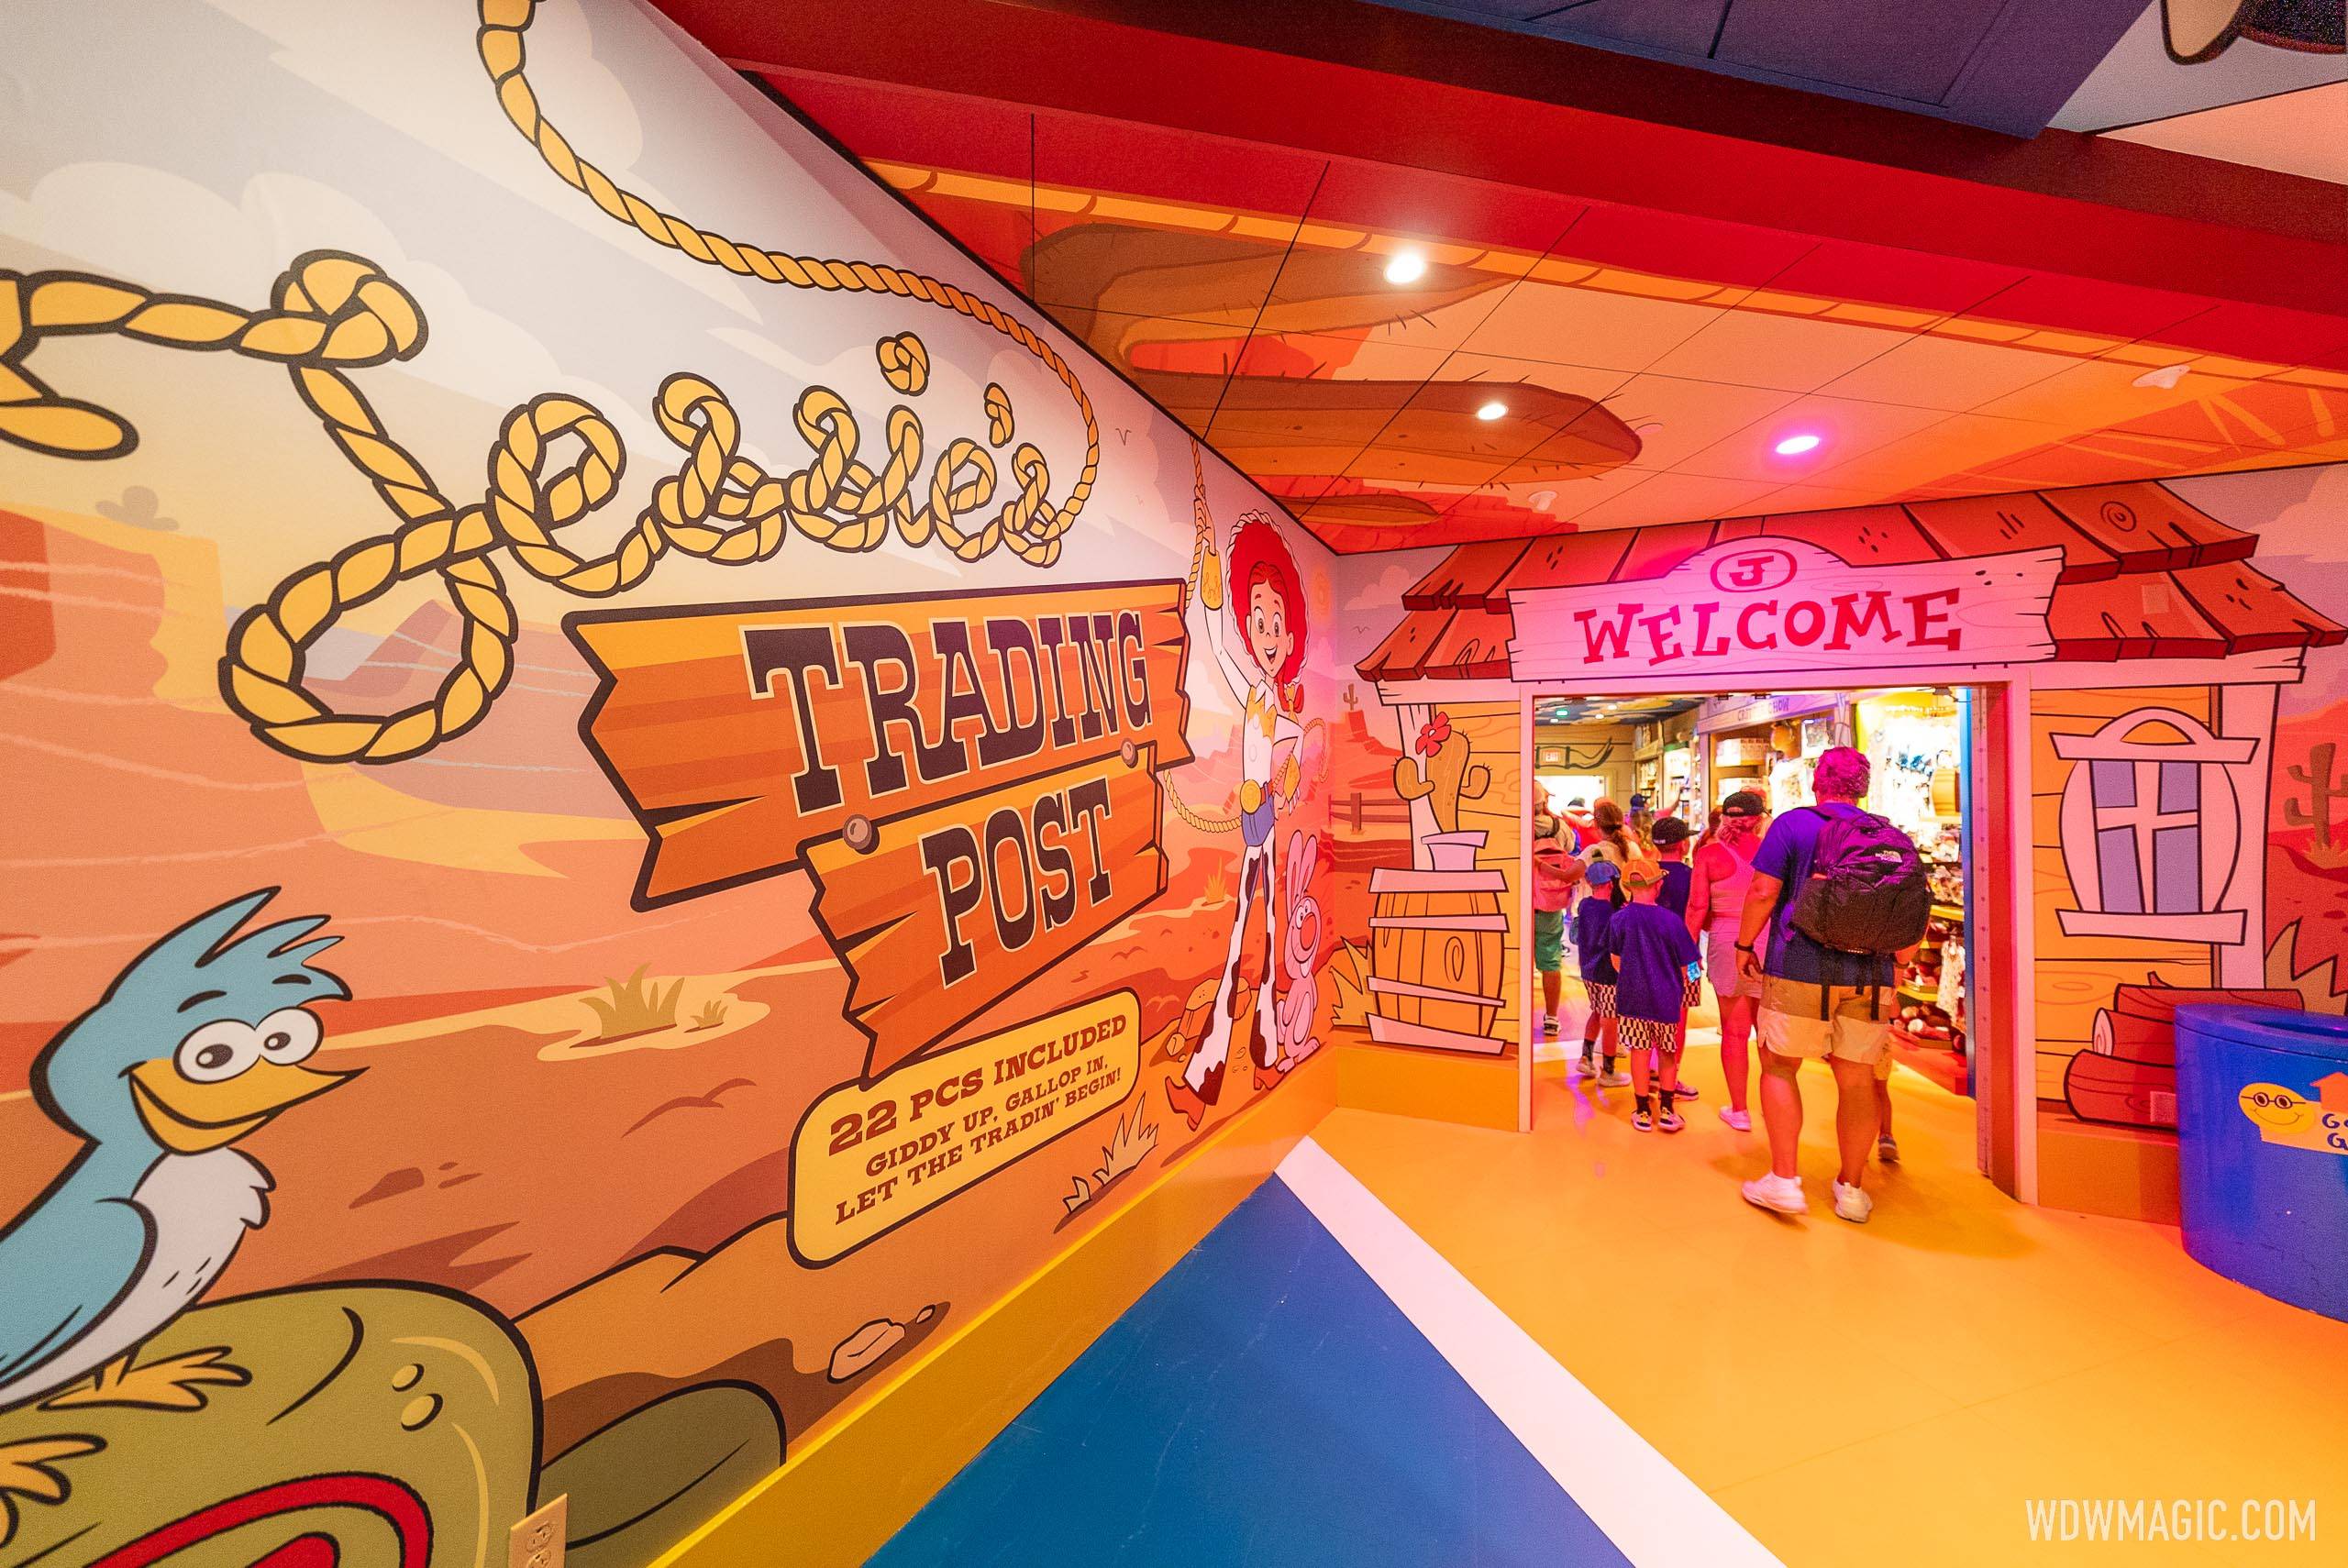 Entrance into Jessie's Trading Post from the exit route of Toy Story Mania